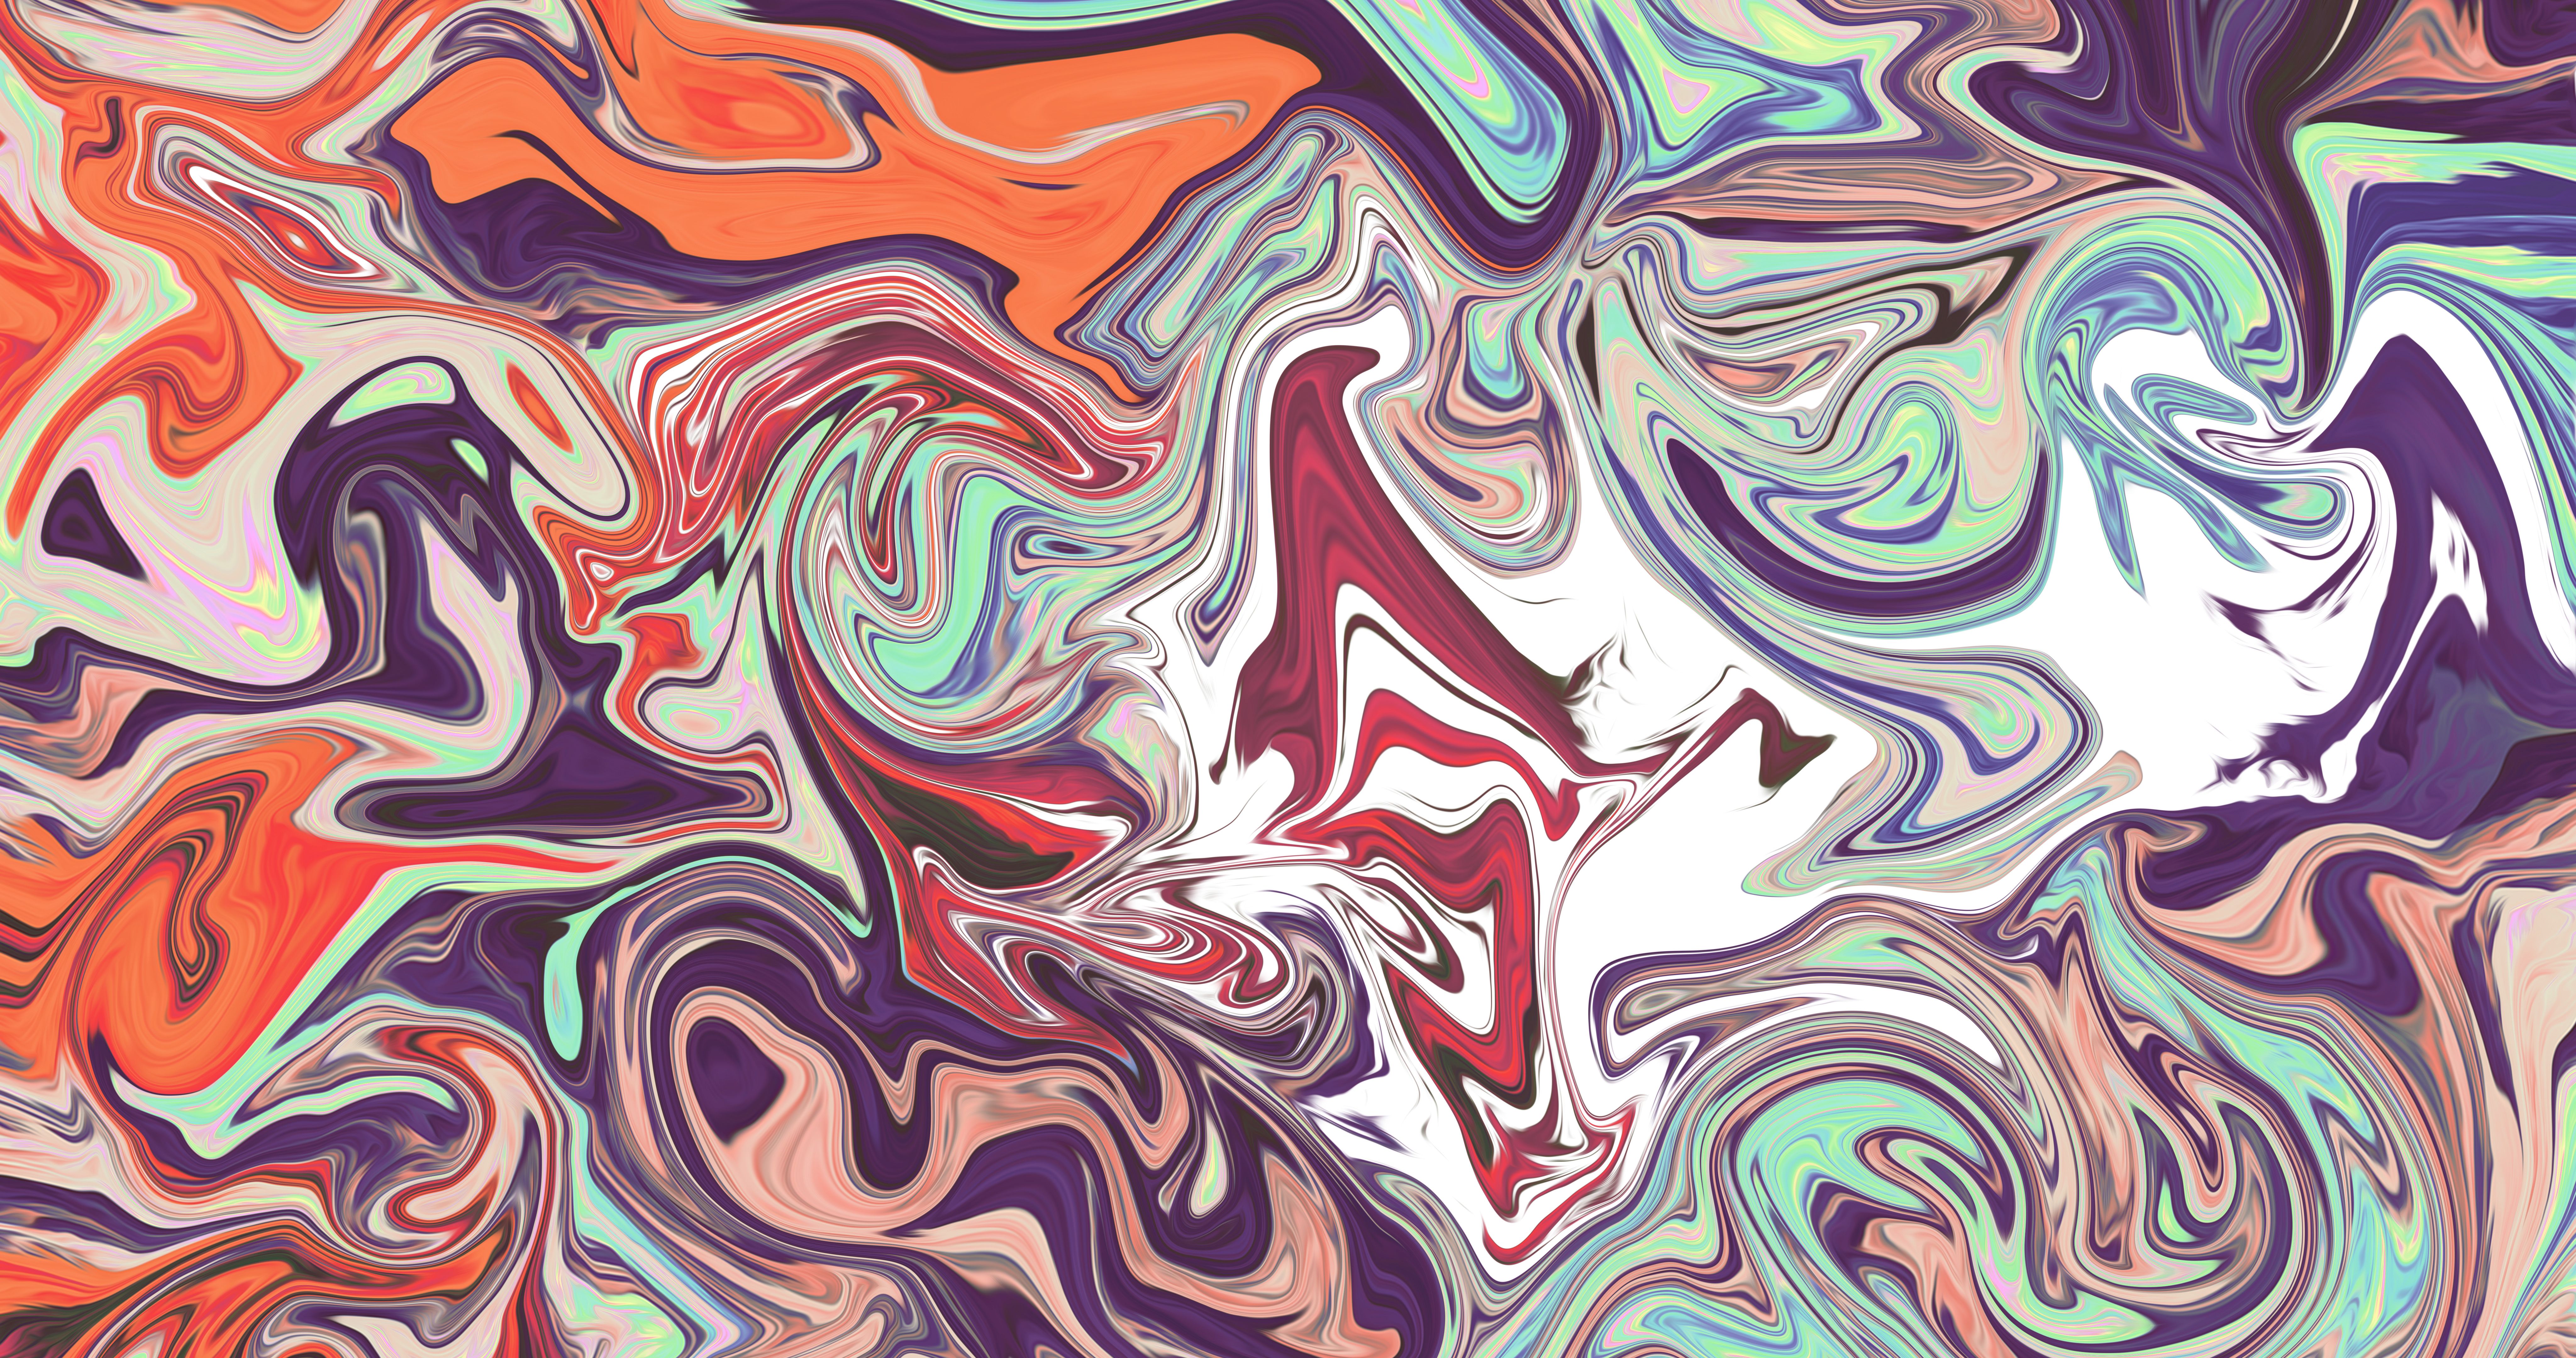 Abstract Liquid Fluid Interference Colorful Shapes Gradient Digital Art Artwork 8k Resolution Screen 8192x4320